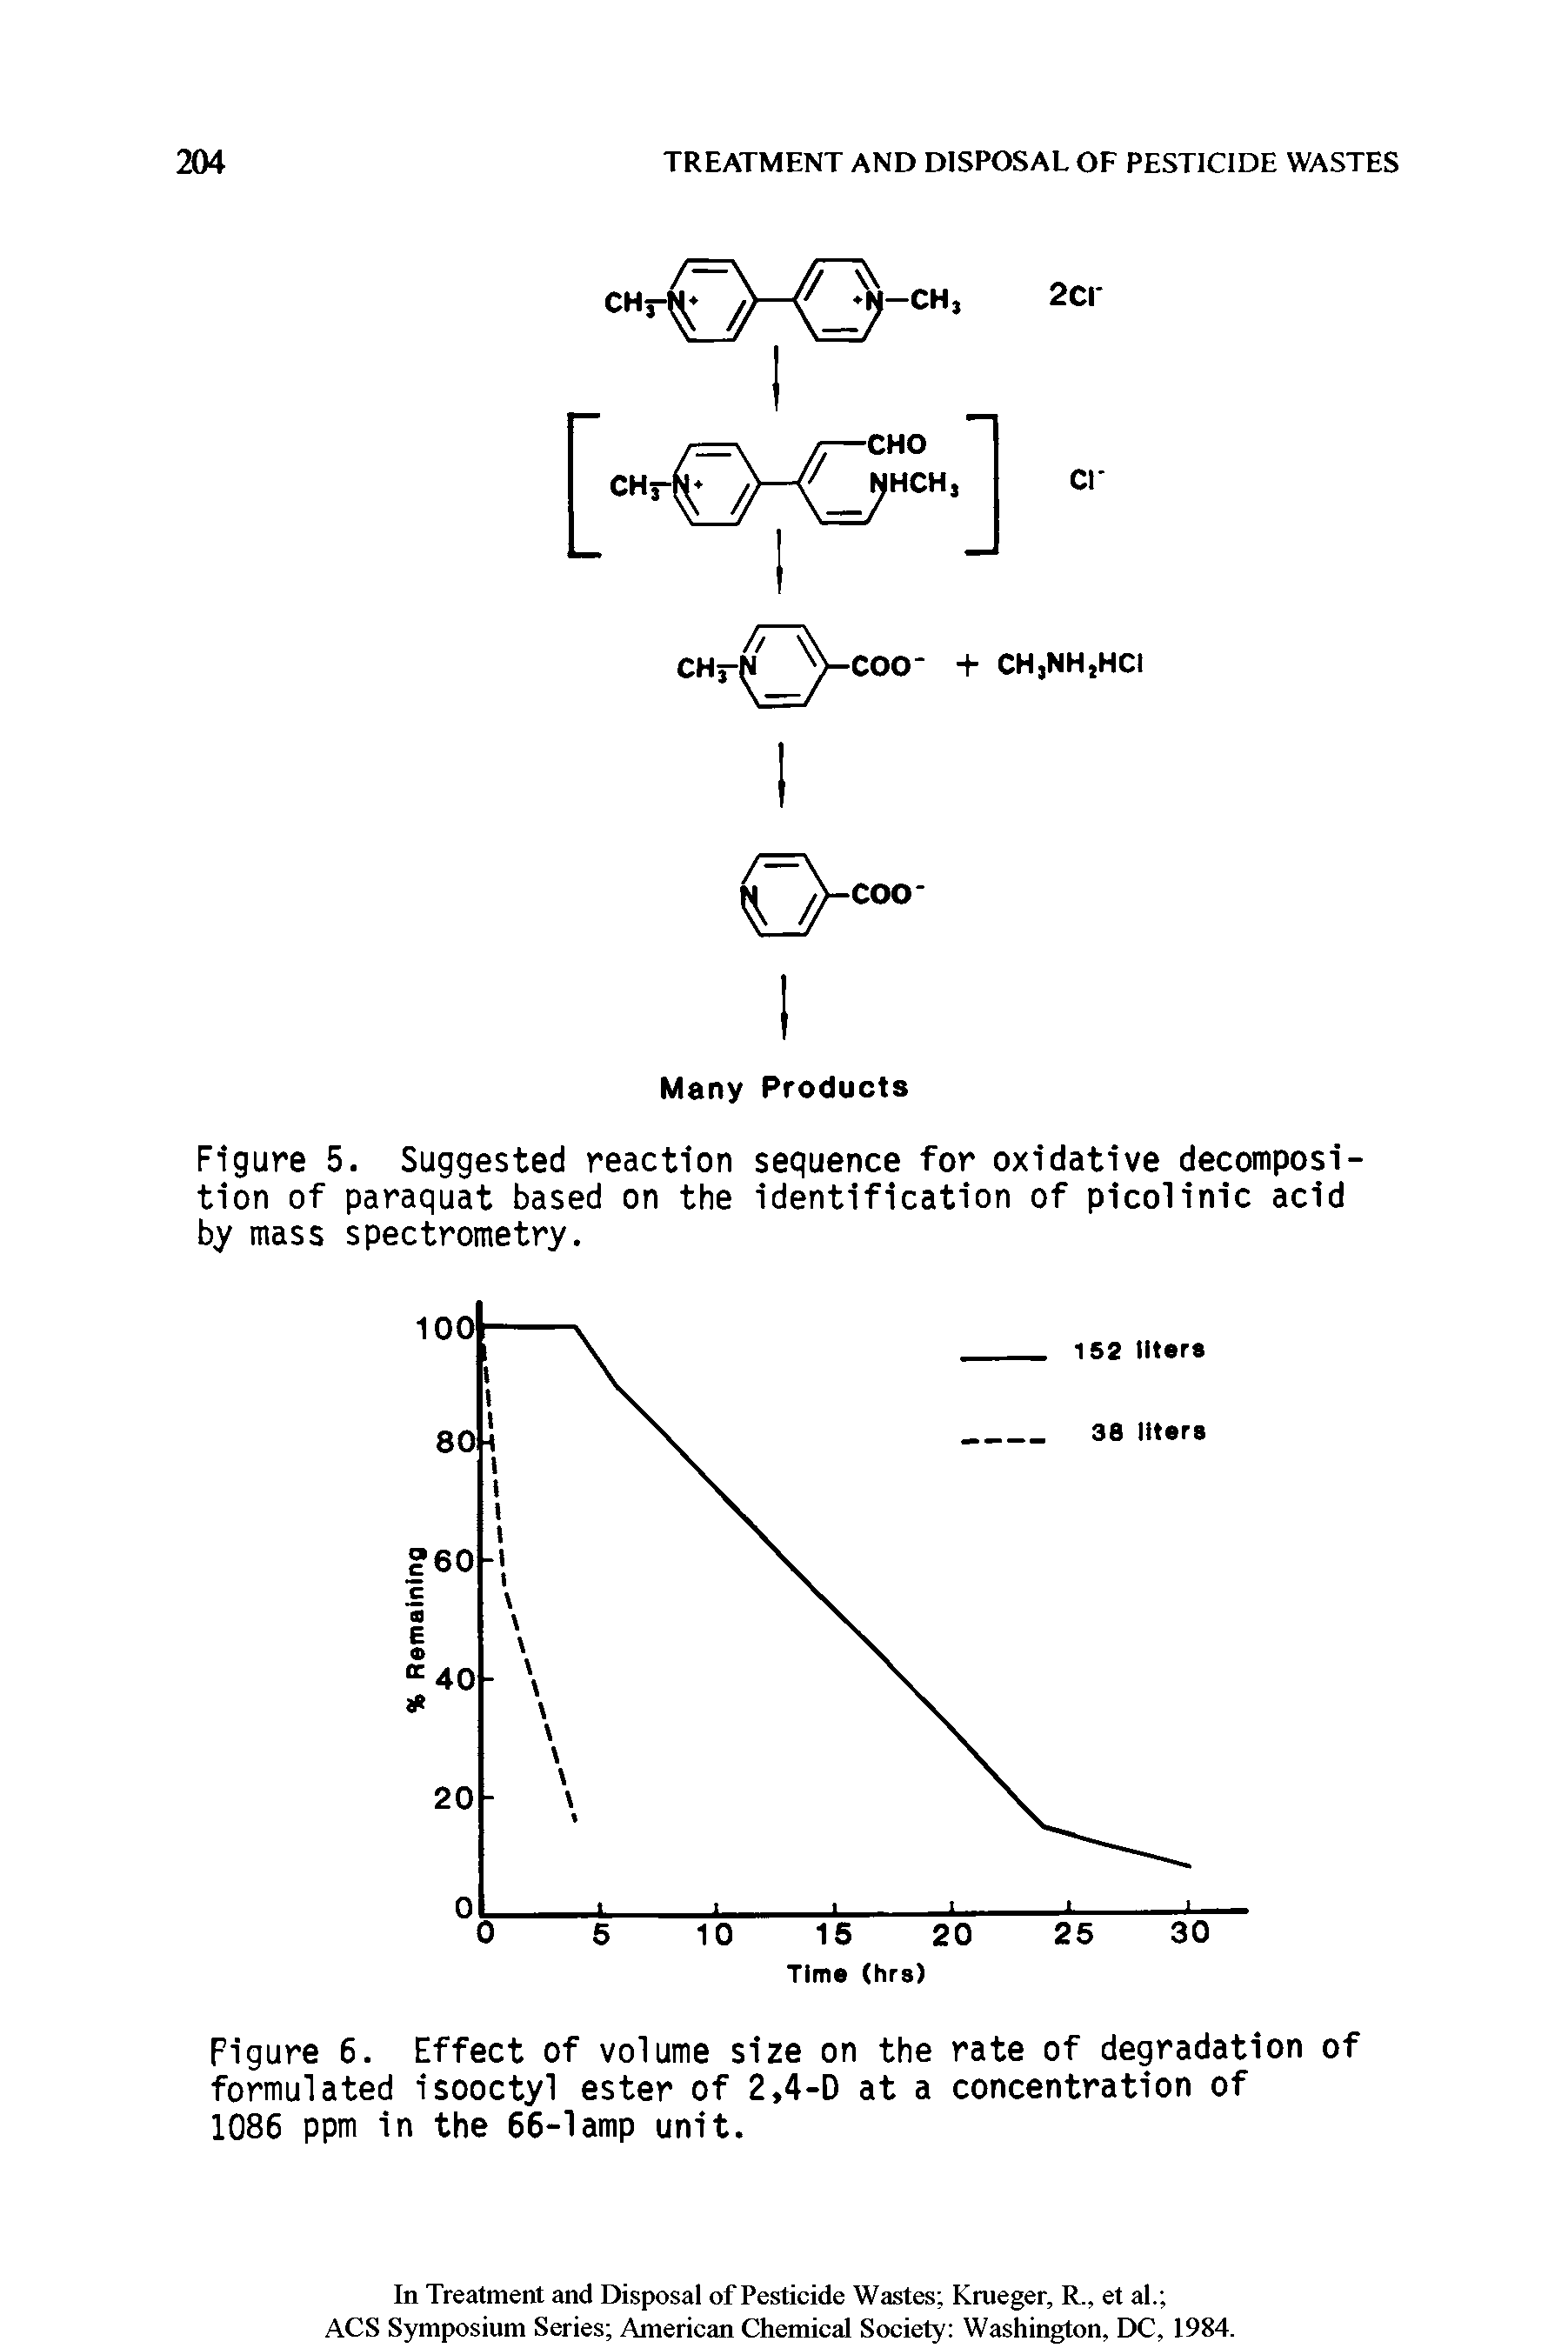 Figure 6. Effect of volume size on the rate of degradation of formulated isooctyl ester of 2,4-D at a concentration of 1086 ppm in the 66-lamp unit.